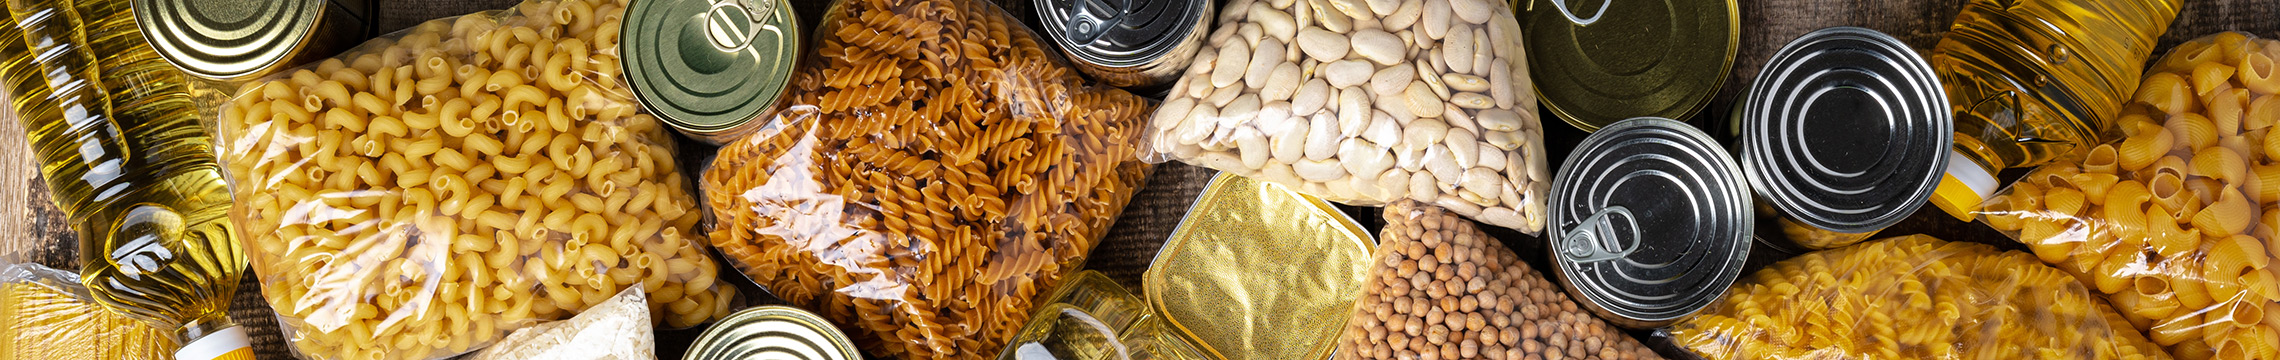 Canned and dried pantry goods against a wood background